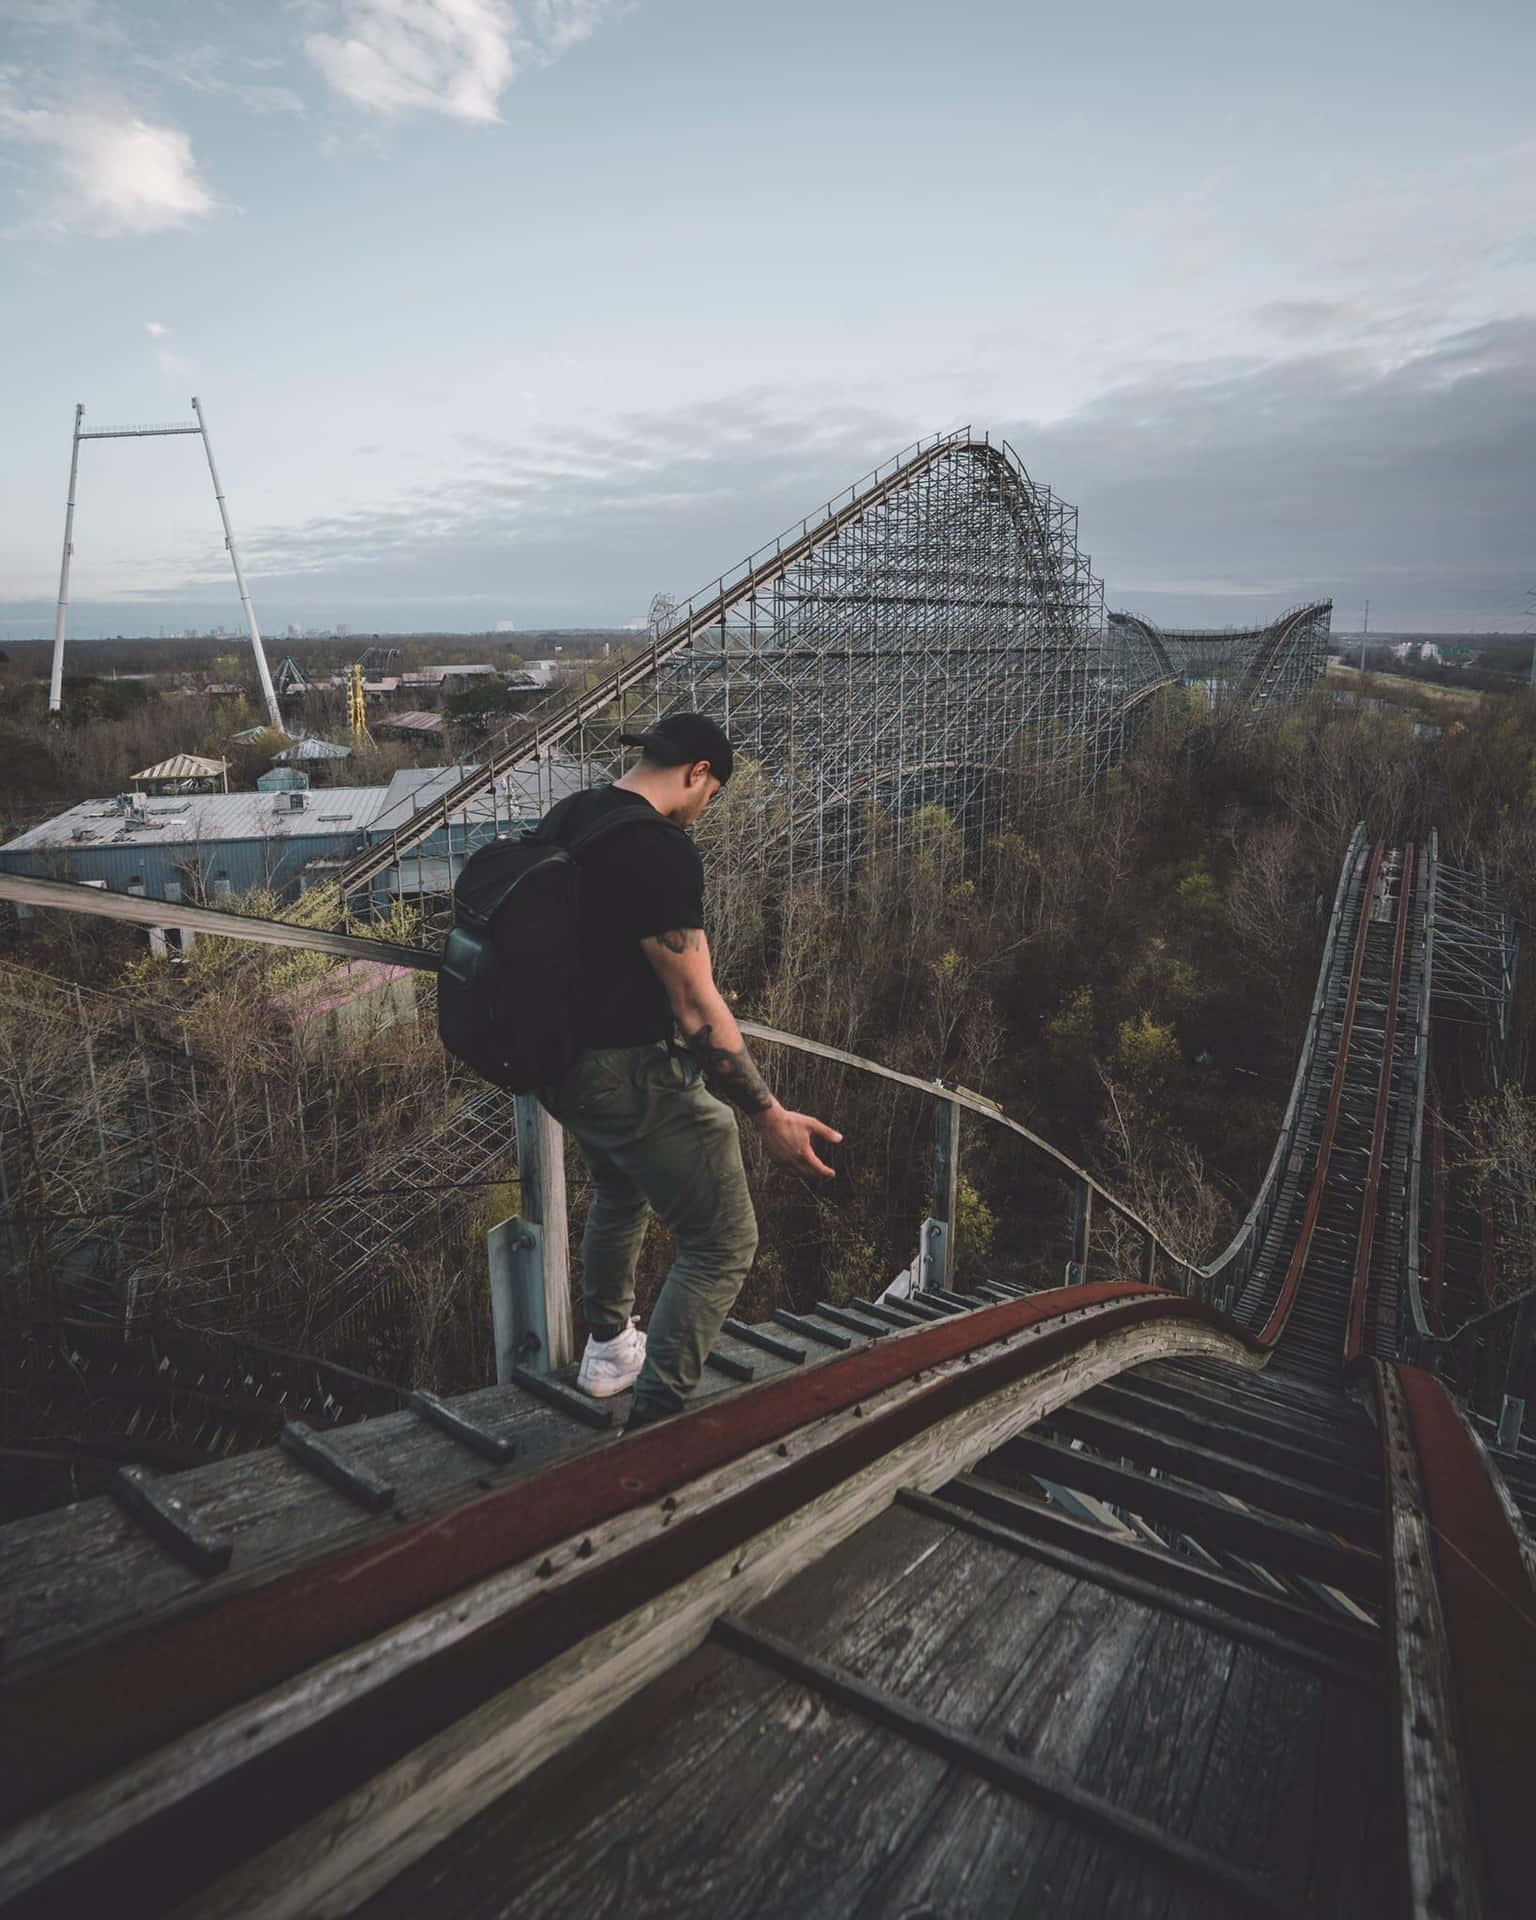 Fun and Thrills Await at Six Flags